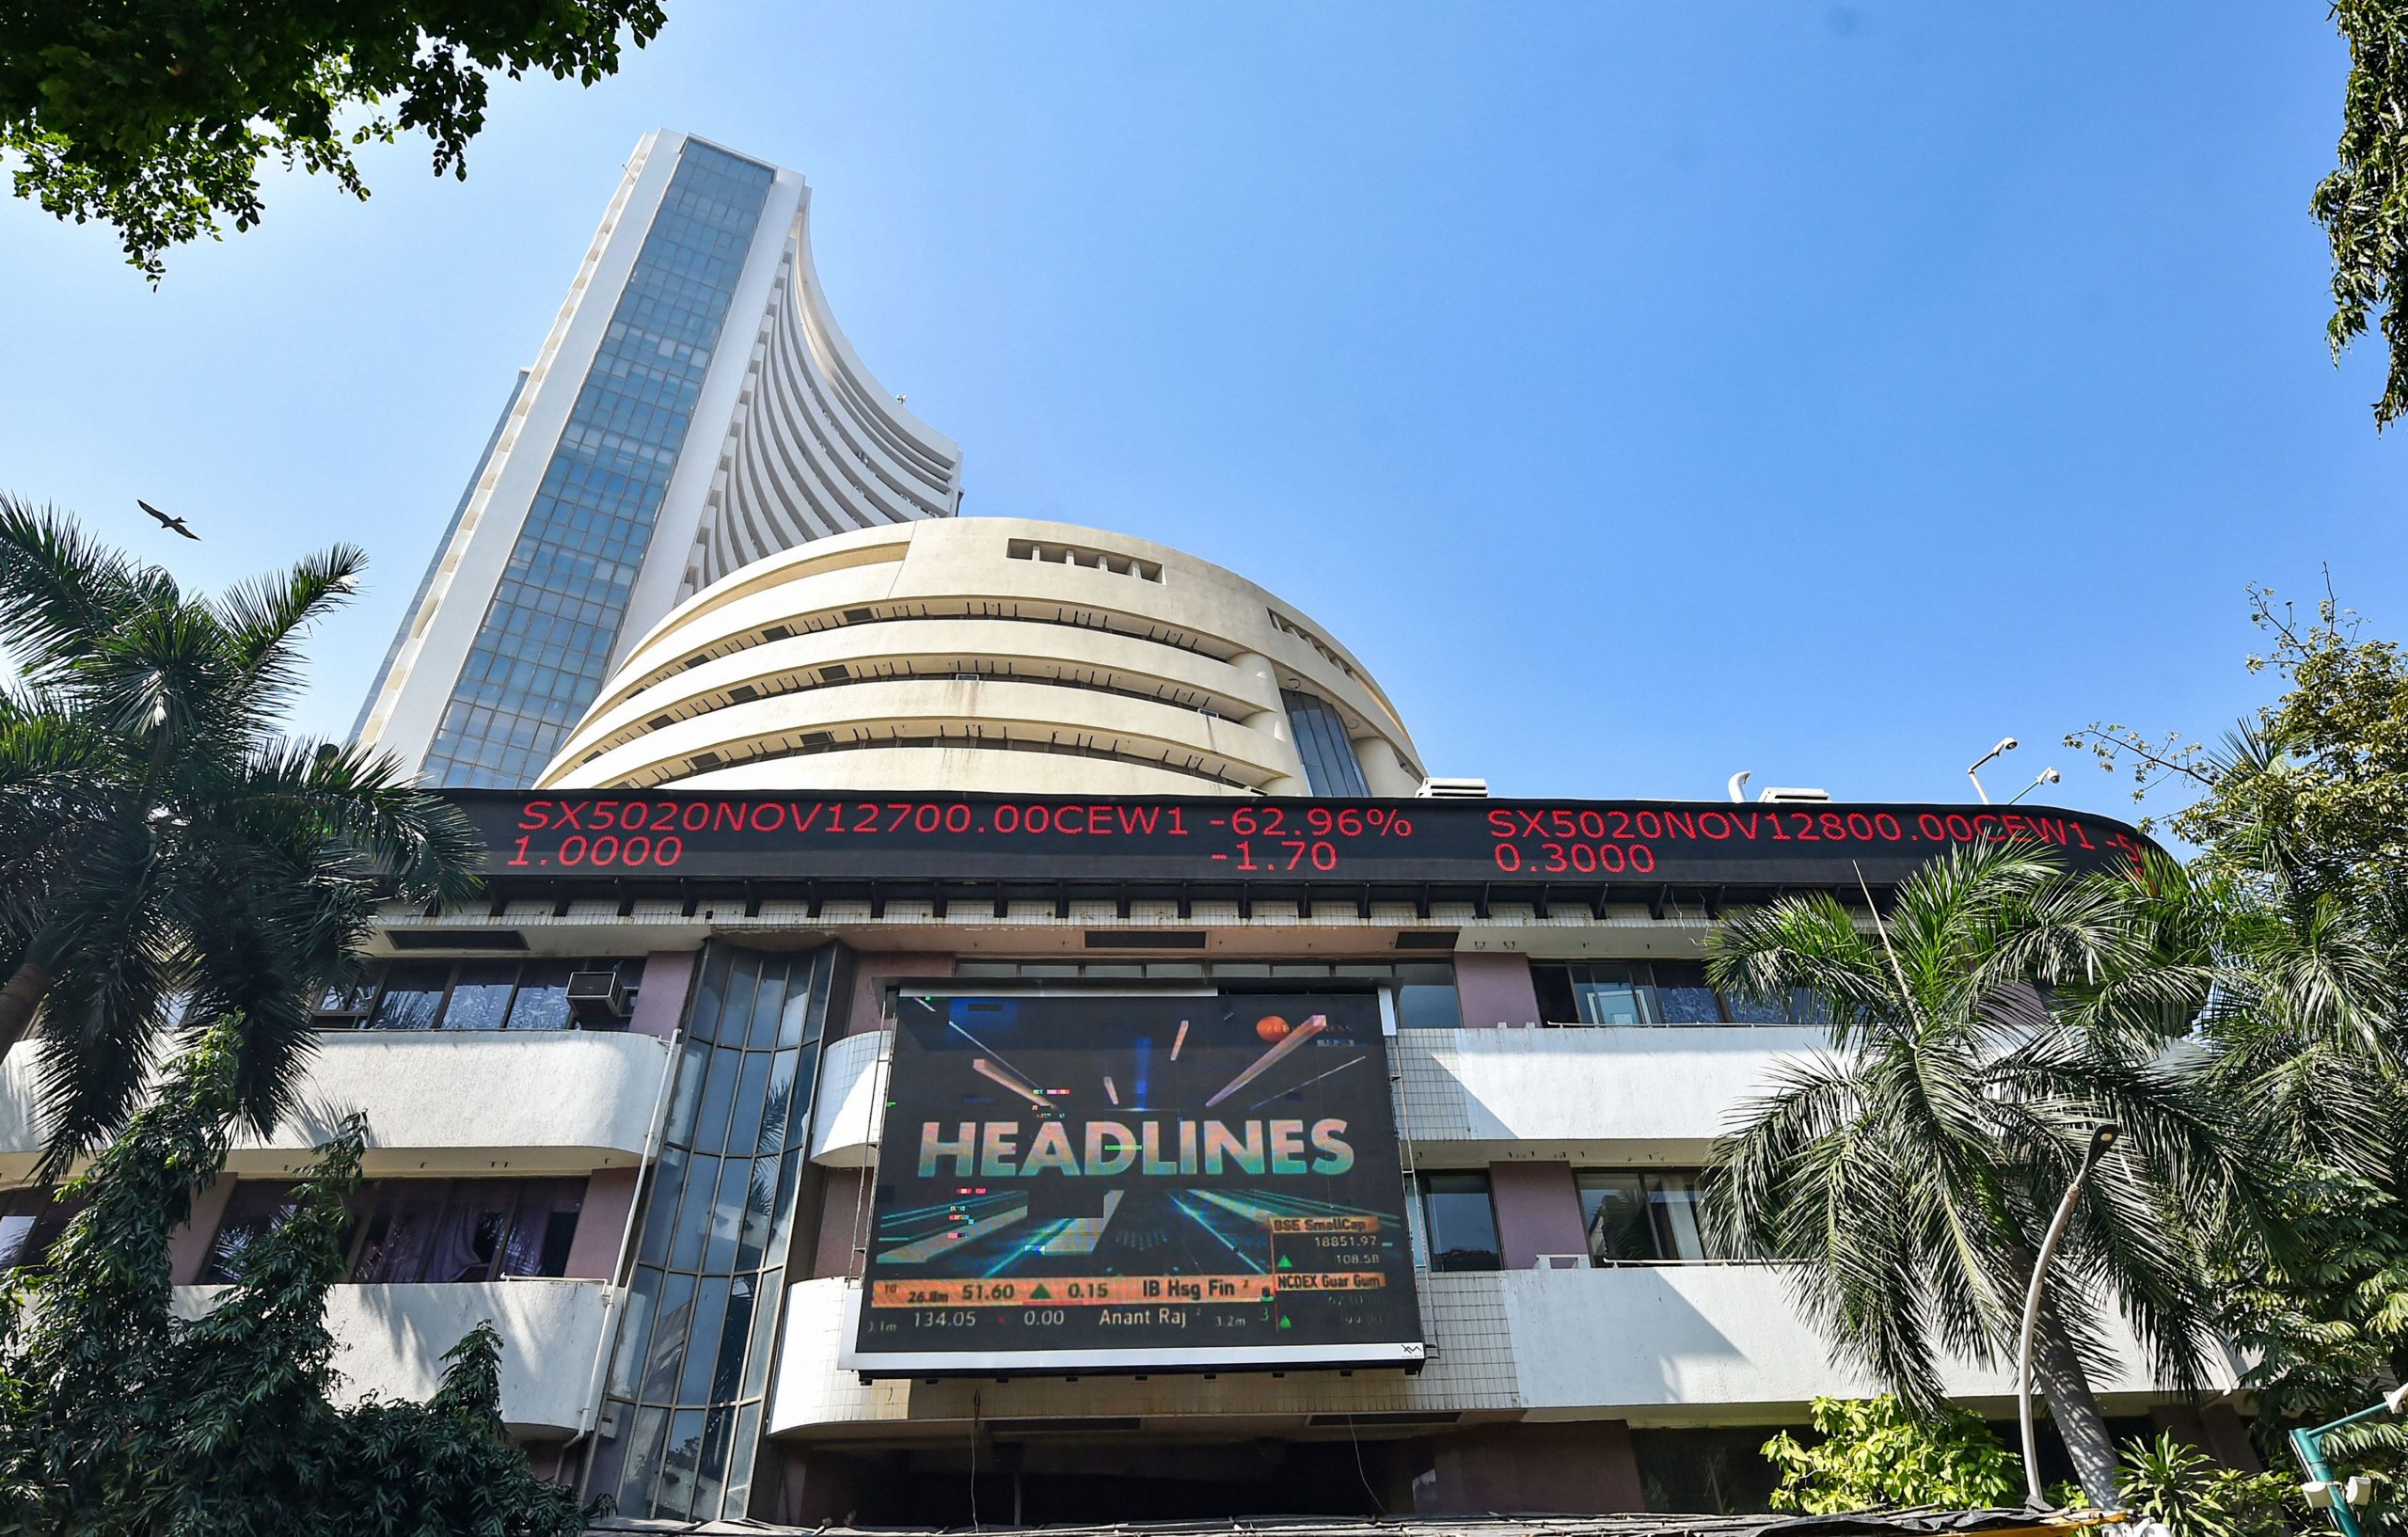 Trending Stocks: TCS, Wipro, Infosys, Federal Bank and others in news today